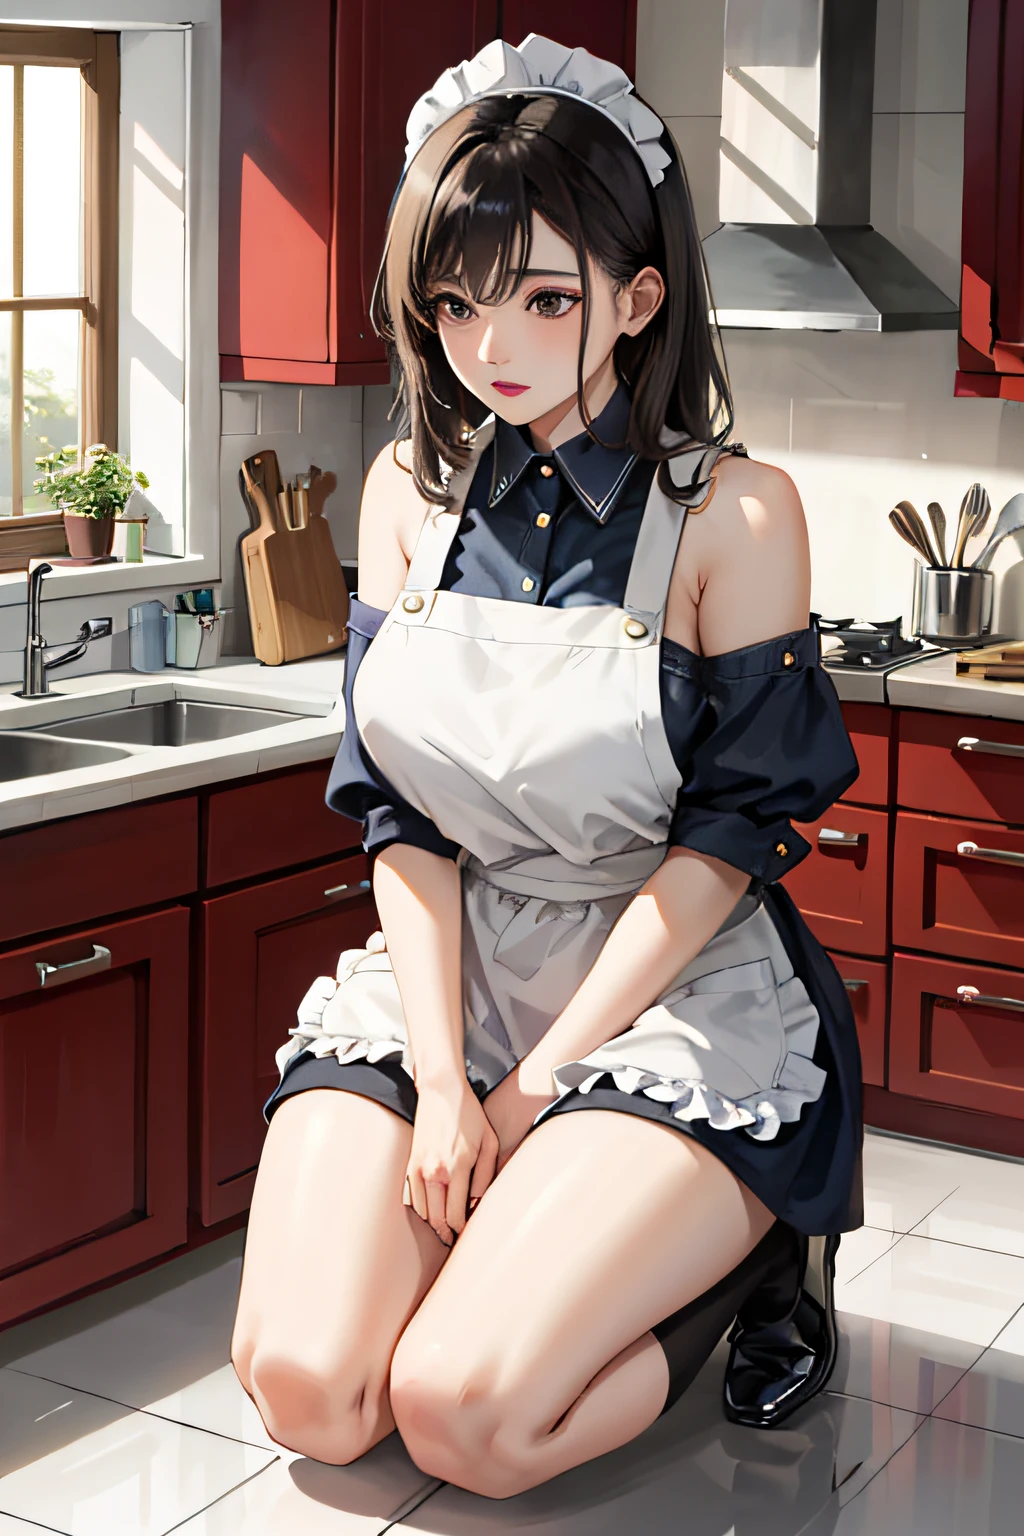 A tall and beautiful mature woman，Expression confidence, showing her thighs and shoulders, busty figure, Big breasts, A ball head, wearing apron, a human wife, In a kitchen, Kneeling on the ground.